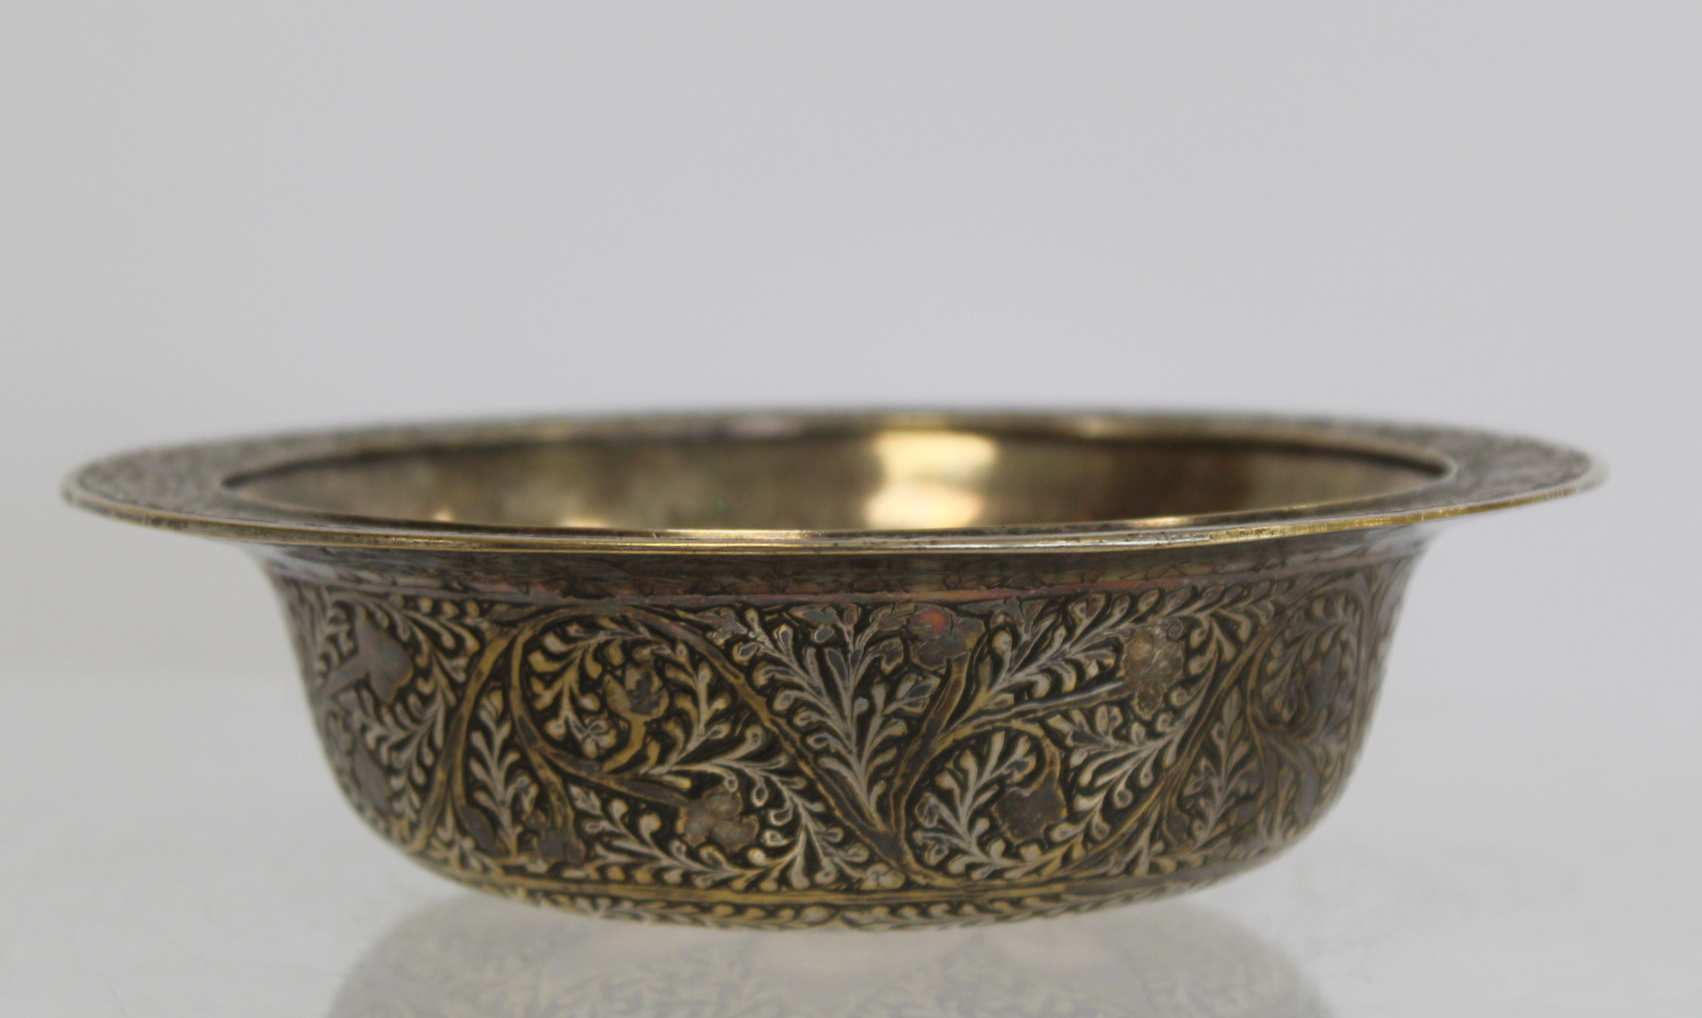 Oriental silvered circular brass bowl with engraved floral and foliate decoration, 16cm diam. - Image 2 of 9